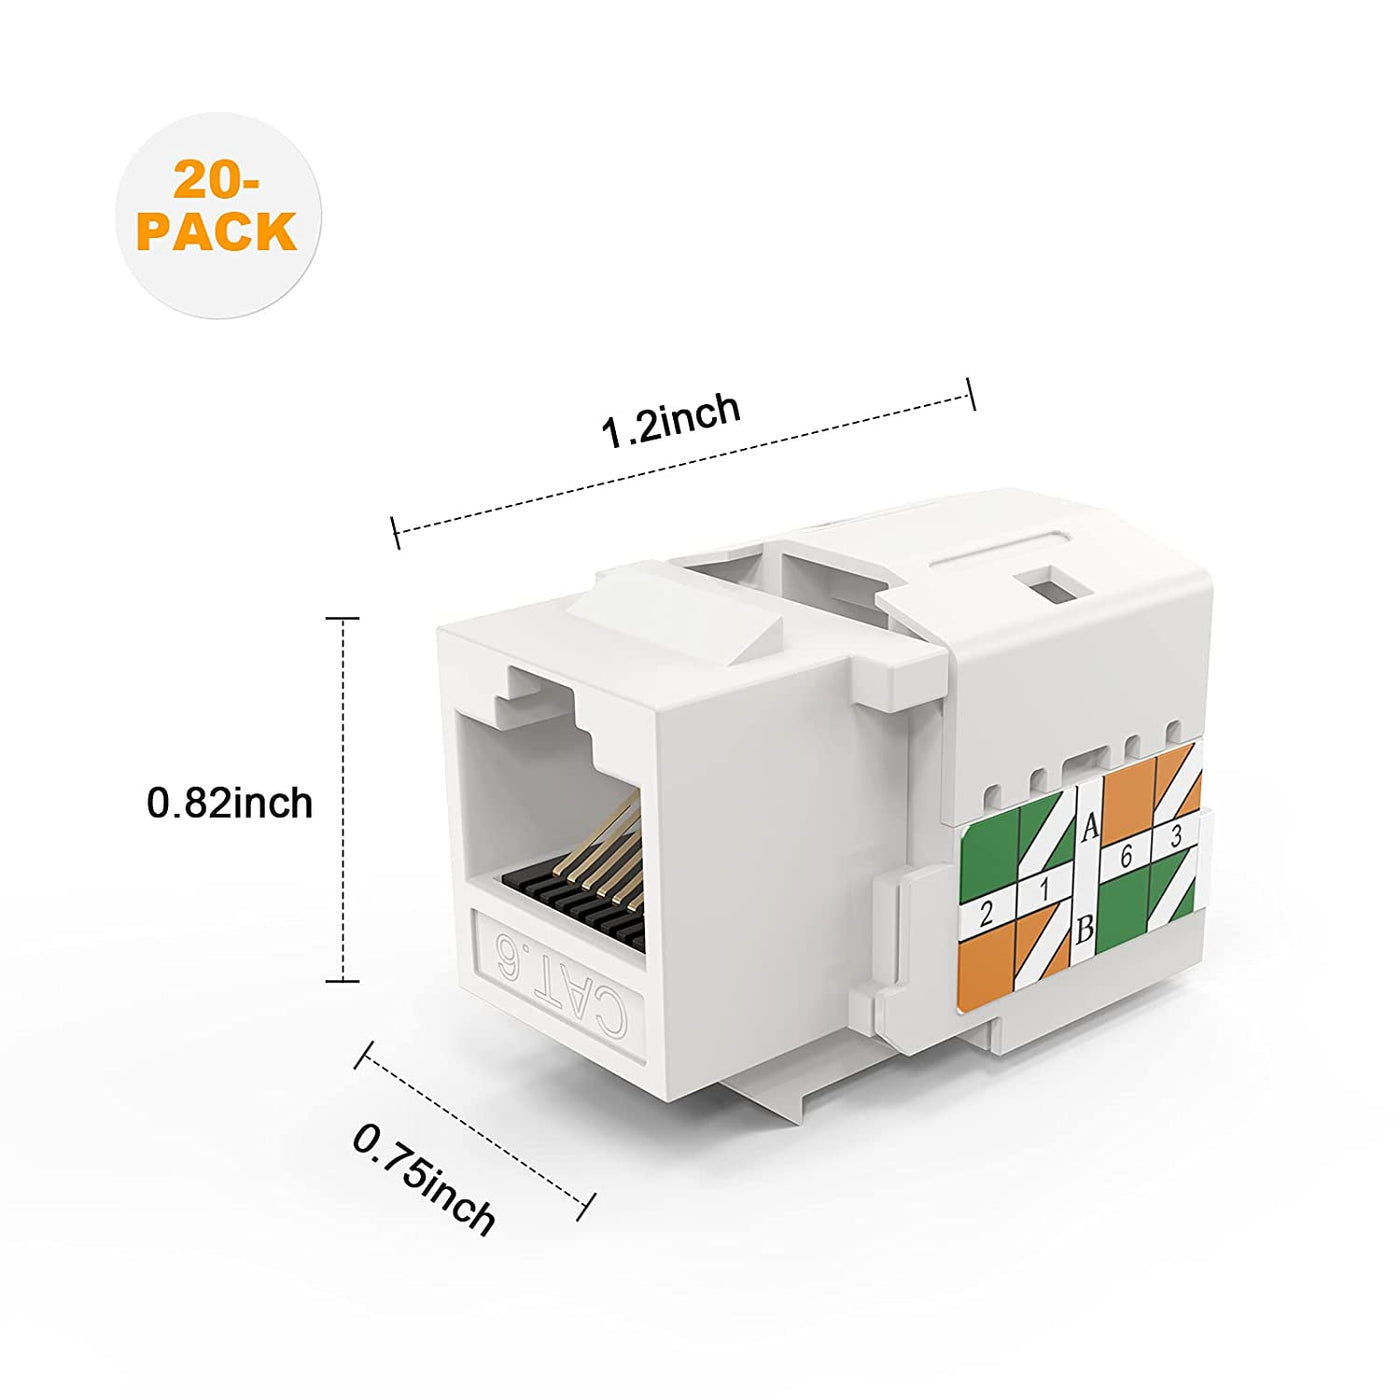 rj45 cat6 easy ethernet cable connector plug